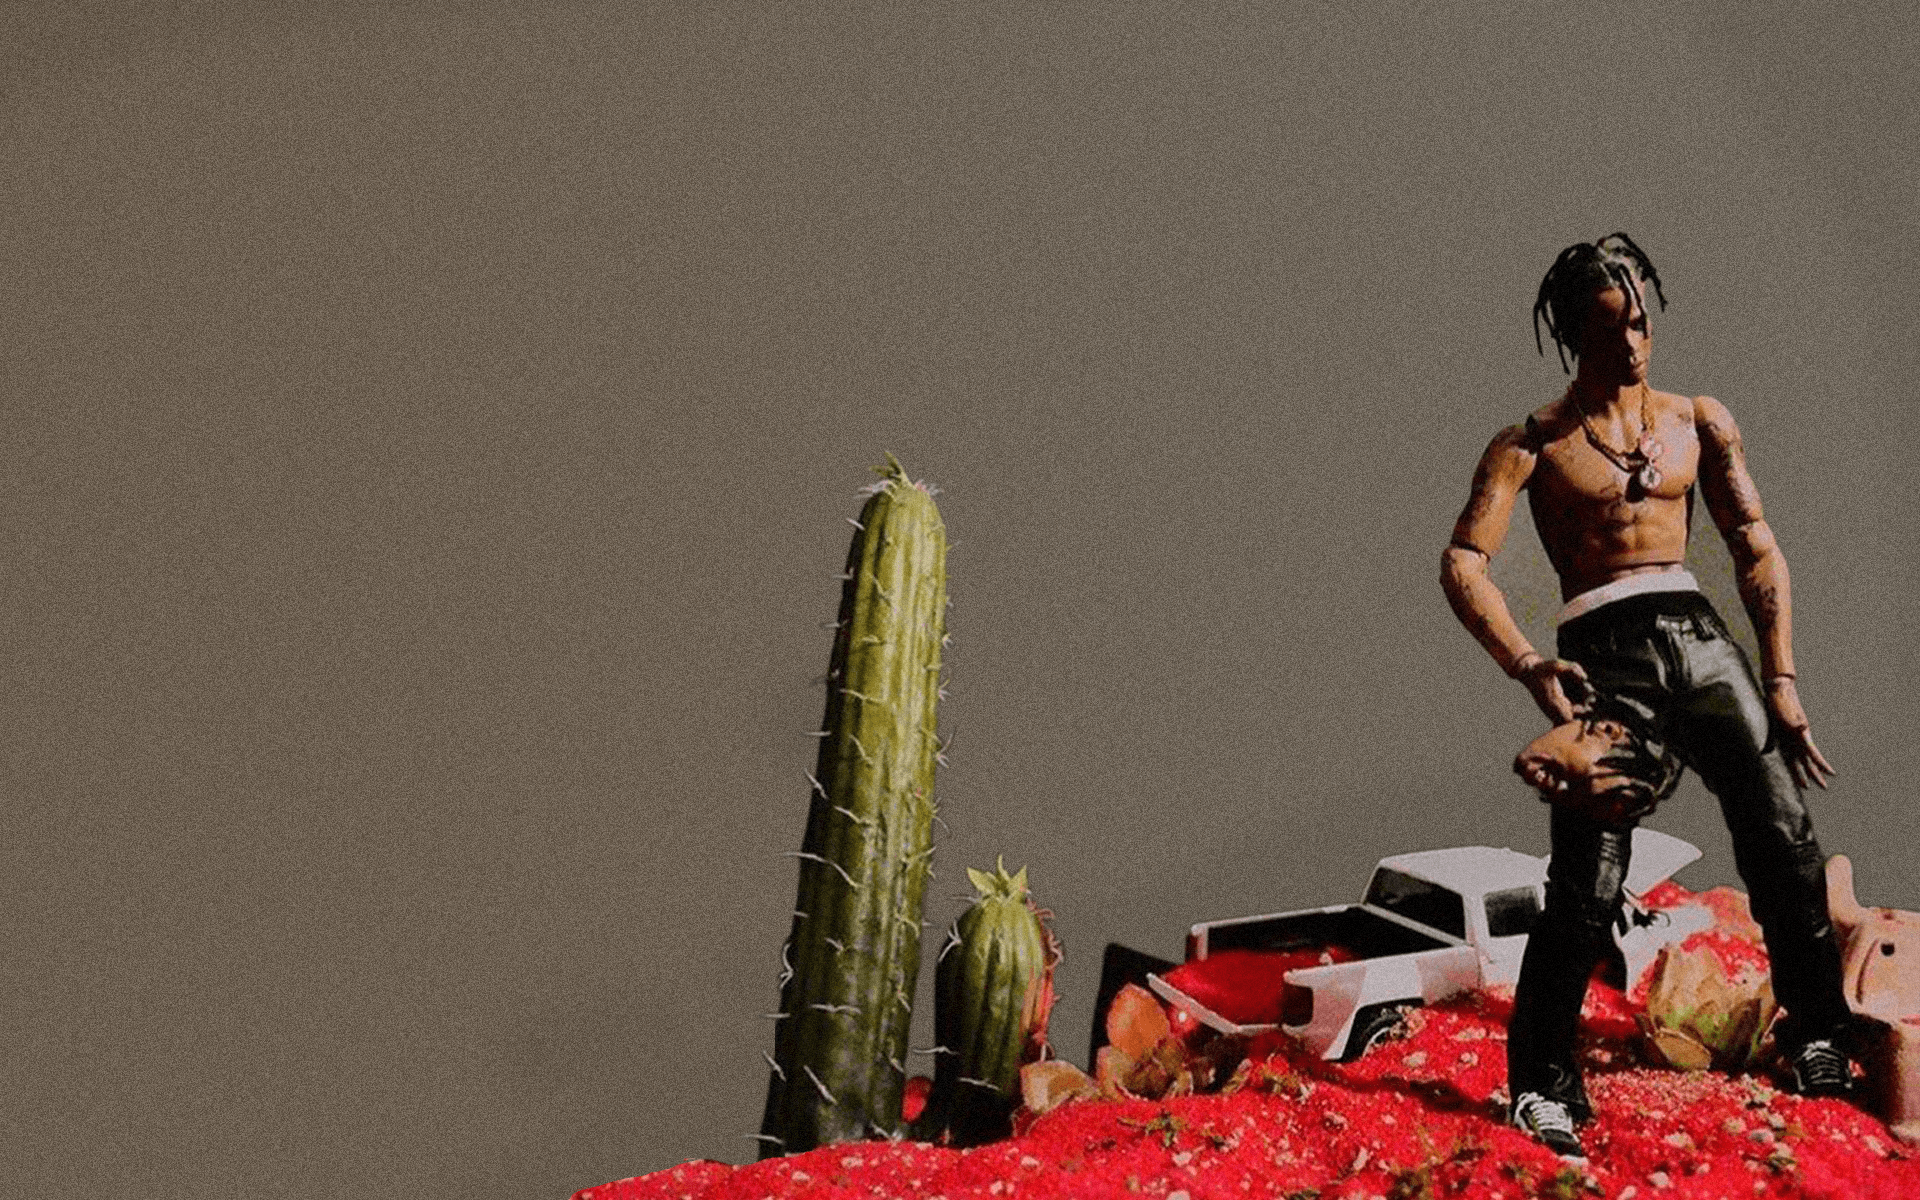 Turned that rodeo photohoot into a 1080p desktop wallpaper